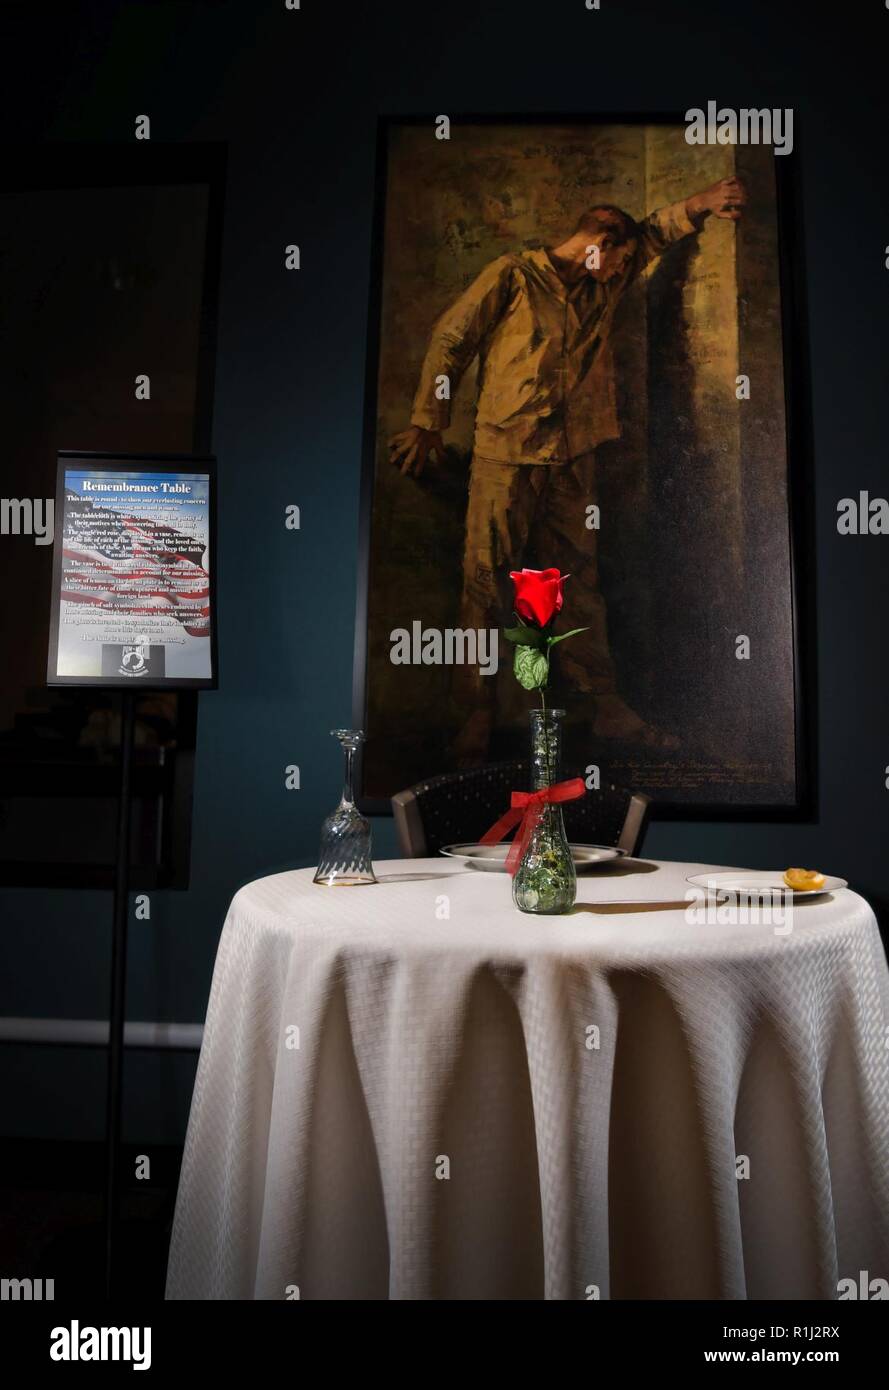 The remembrance table stands on display in tribute to those who were prisoners of war or missing in action inside the Satellite Dish dining facility at Schriever Air Force Base, Colorado, Sept. 21, 2018. Each component of the display represents different aspects. For example, the table’s small size symbolizes the frailty of one prisoner alone against his oppressors and the white table cloth represents purity of their response to our country’s call to arms. Stock Photo